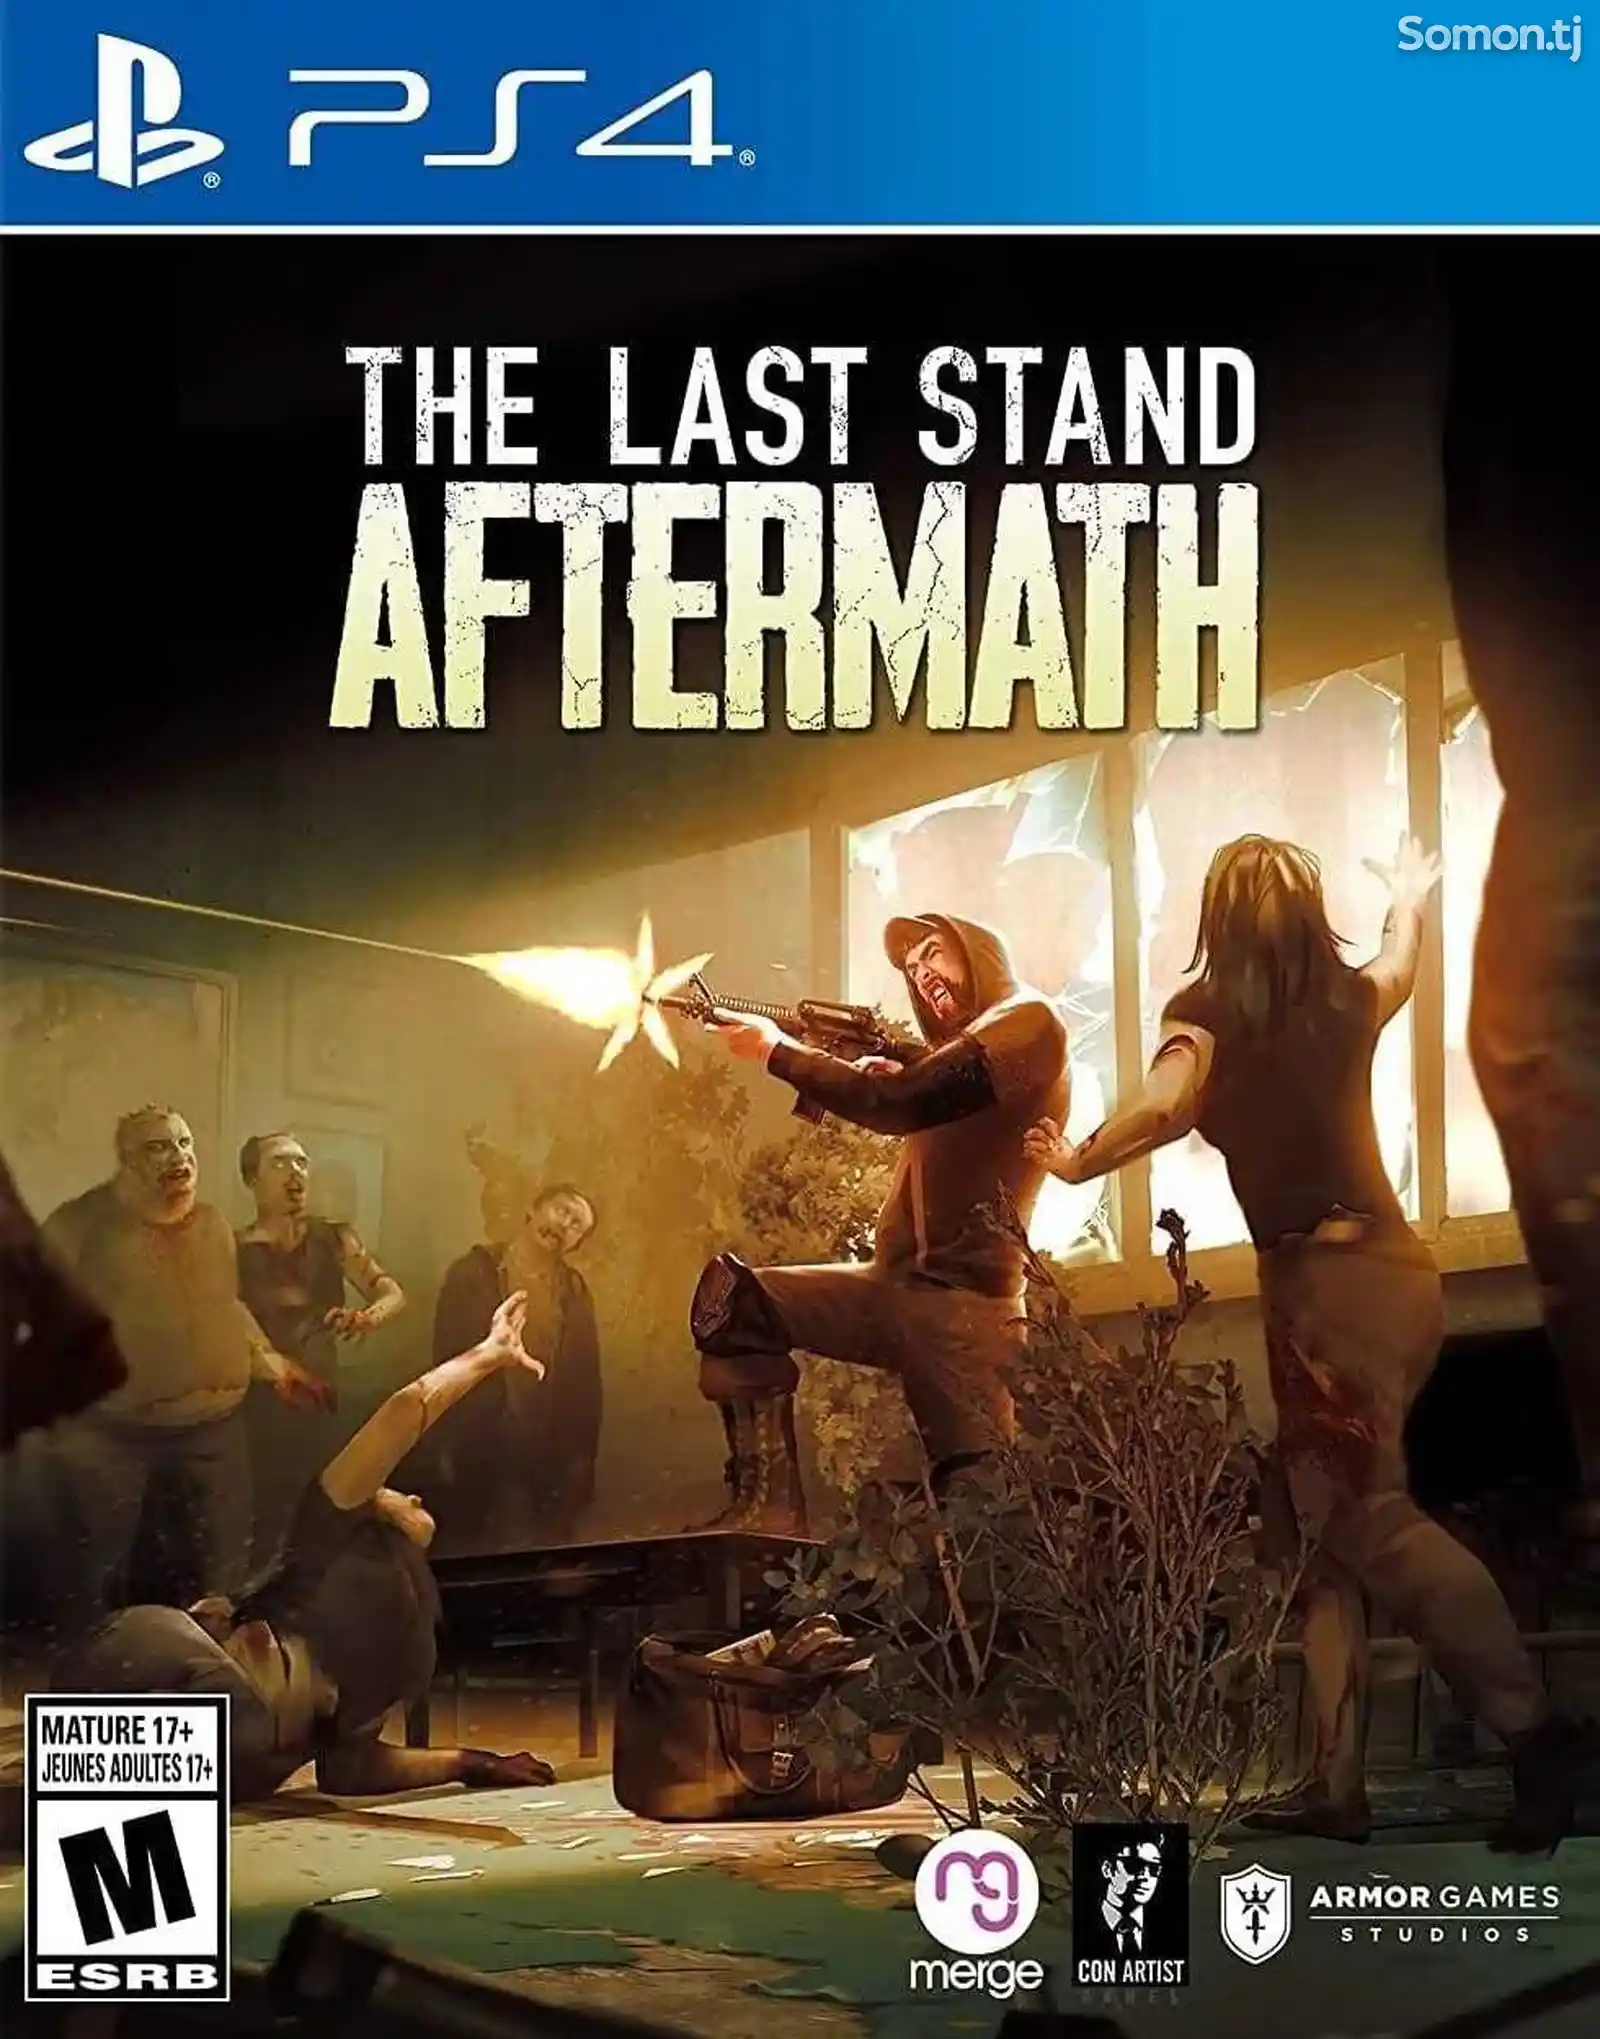 Игра The last stand aftermath для PS-4 / 5.05 / 6.72 / 7.02 / 7.55 / 9.00 /-1